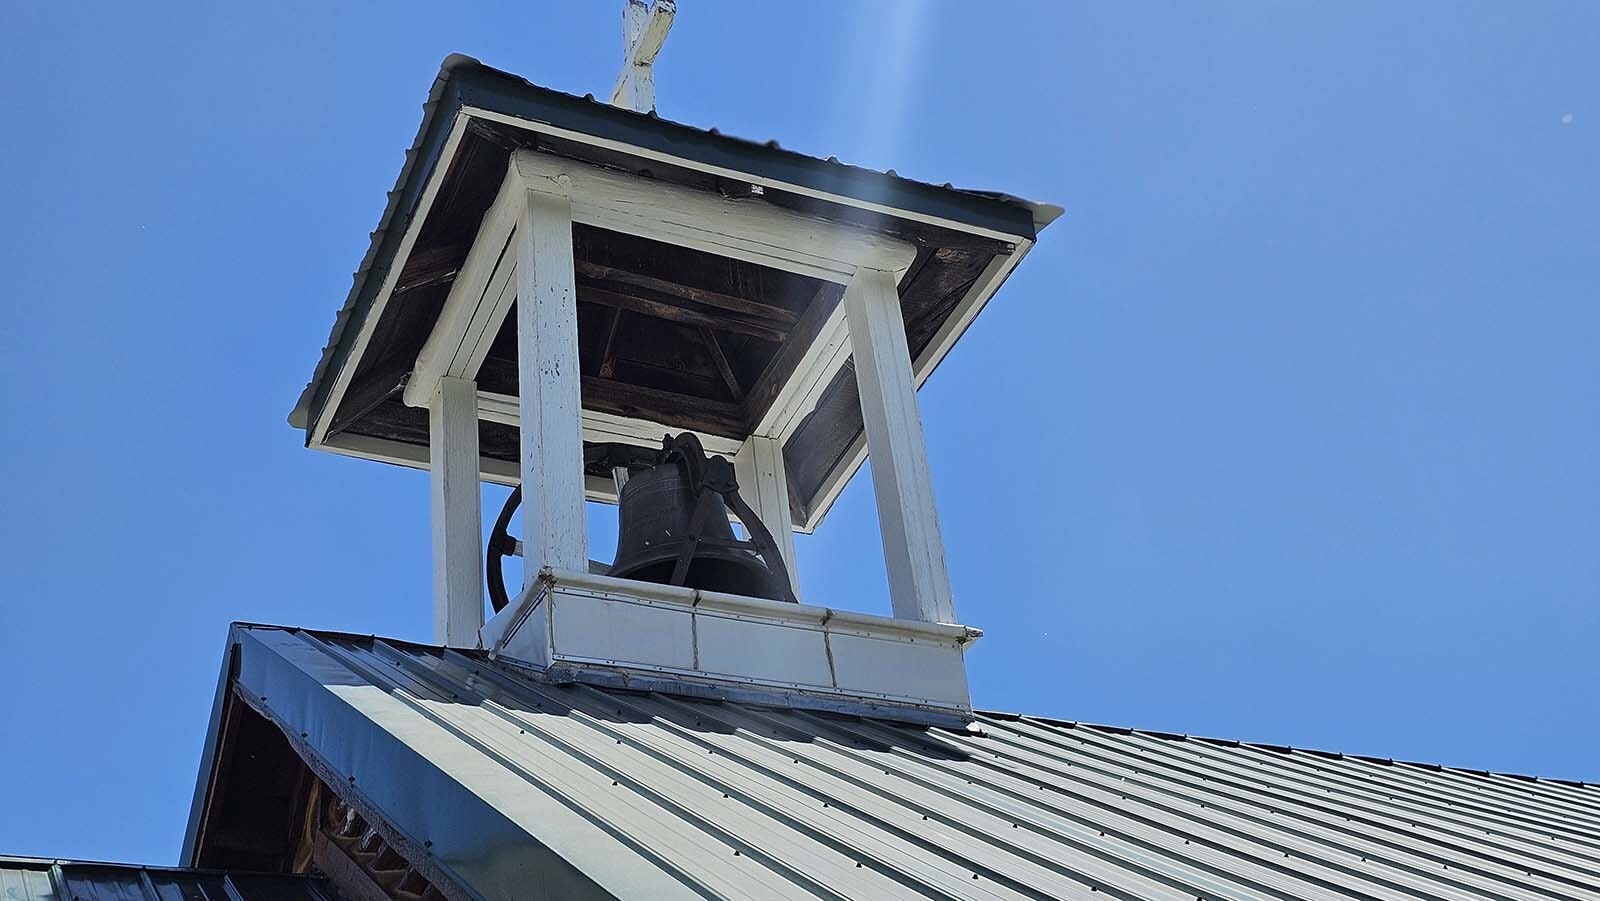 The bell atop the church was donated either by one of Wyoming's first ladies or by the mother-in-law of one of Wyoming's first ladies. No one was quite sure which.